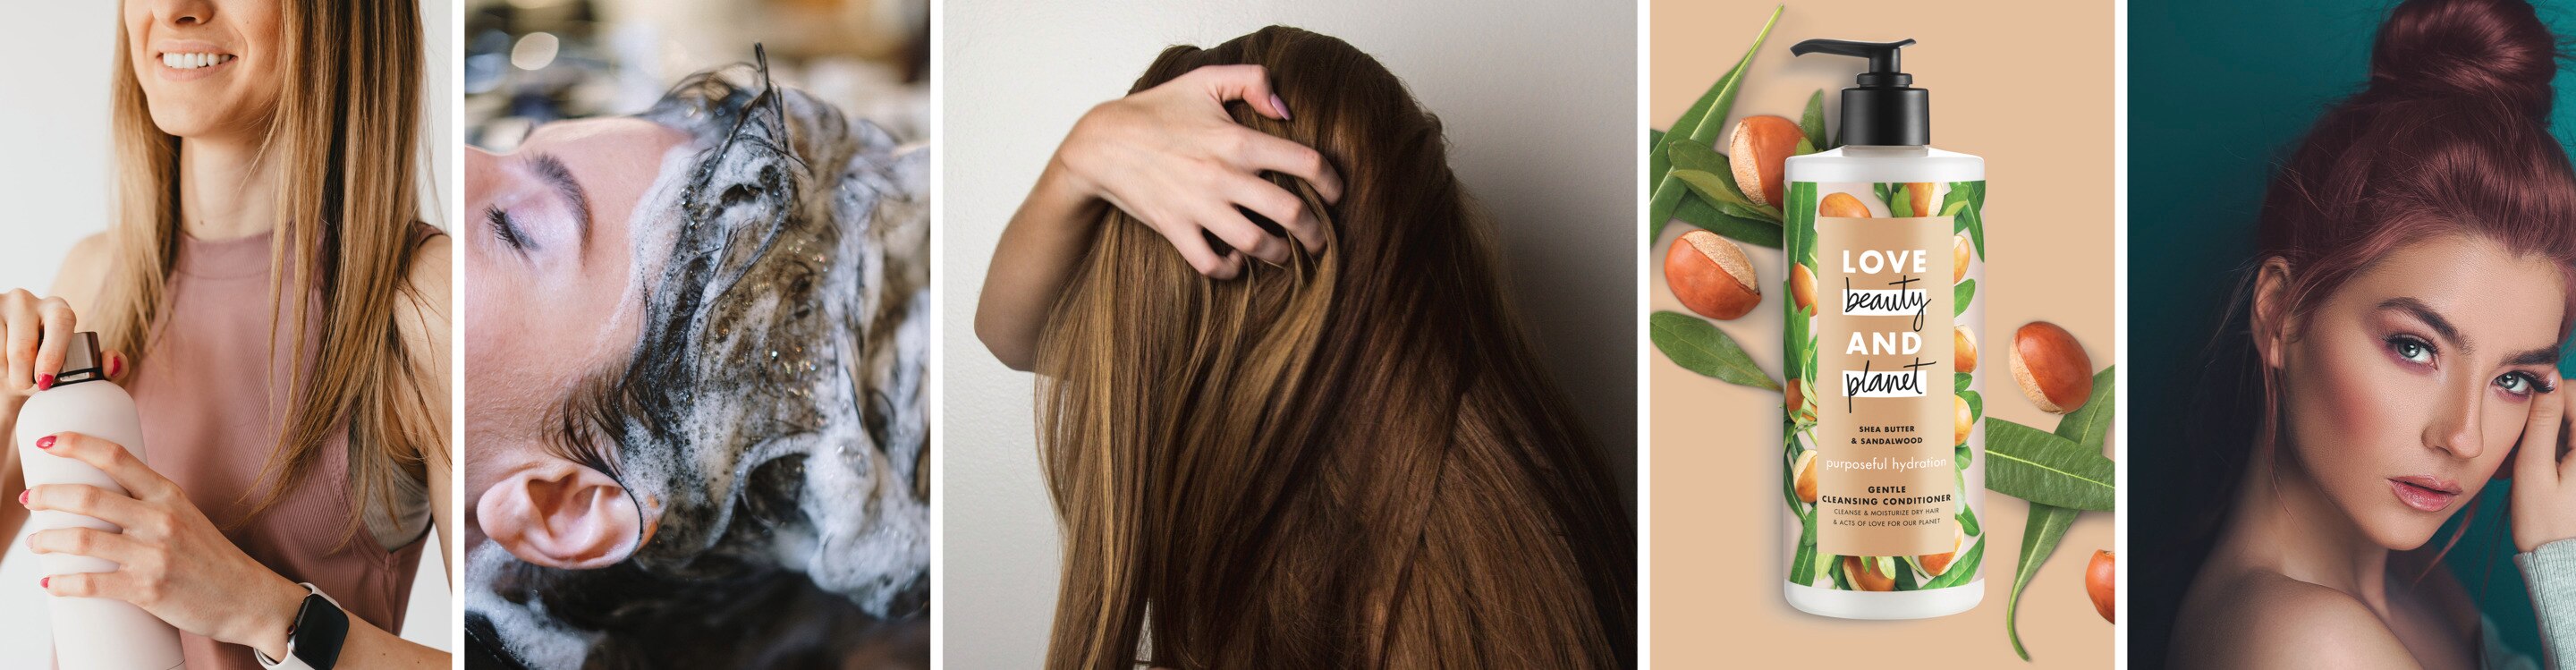 How to take care of damaged hair